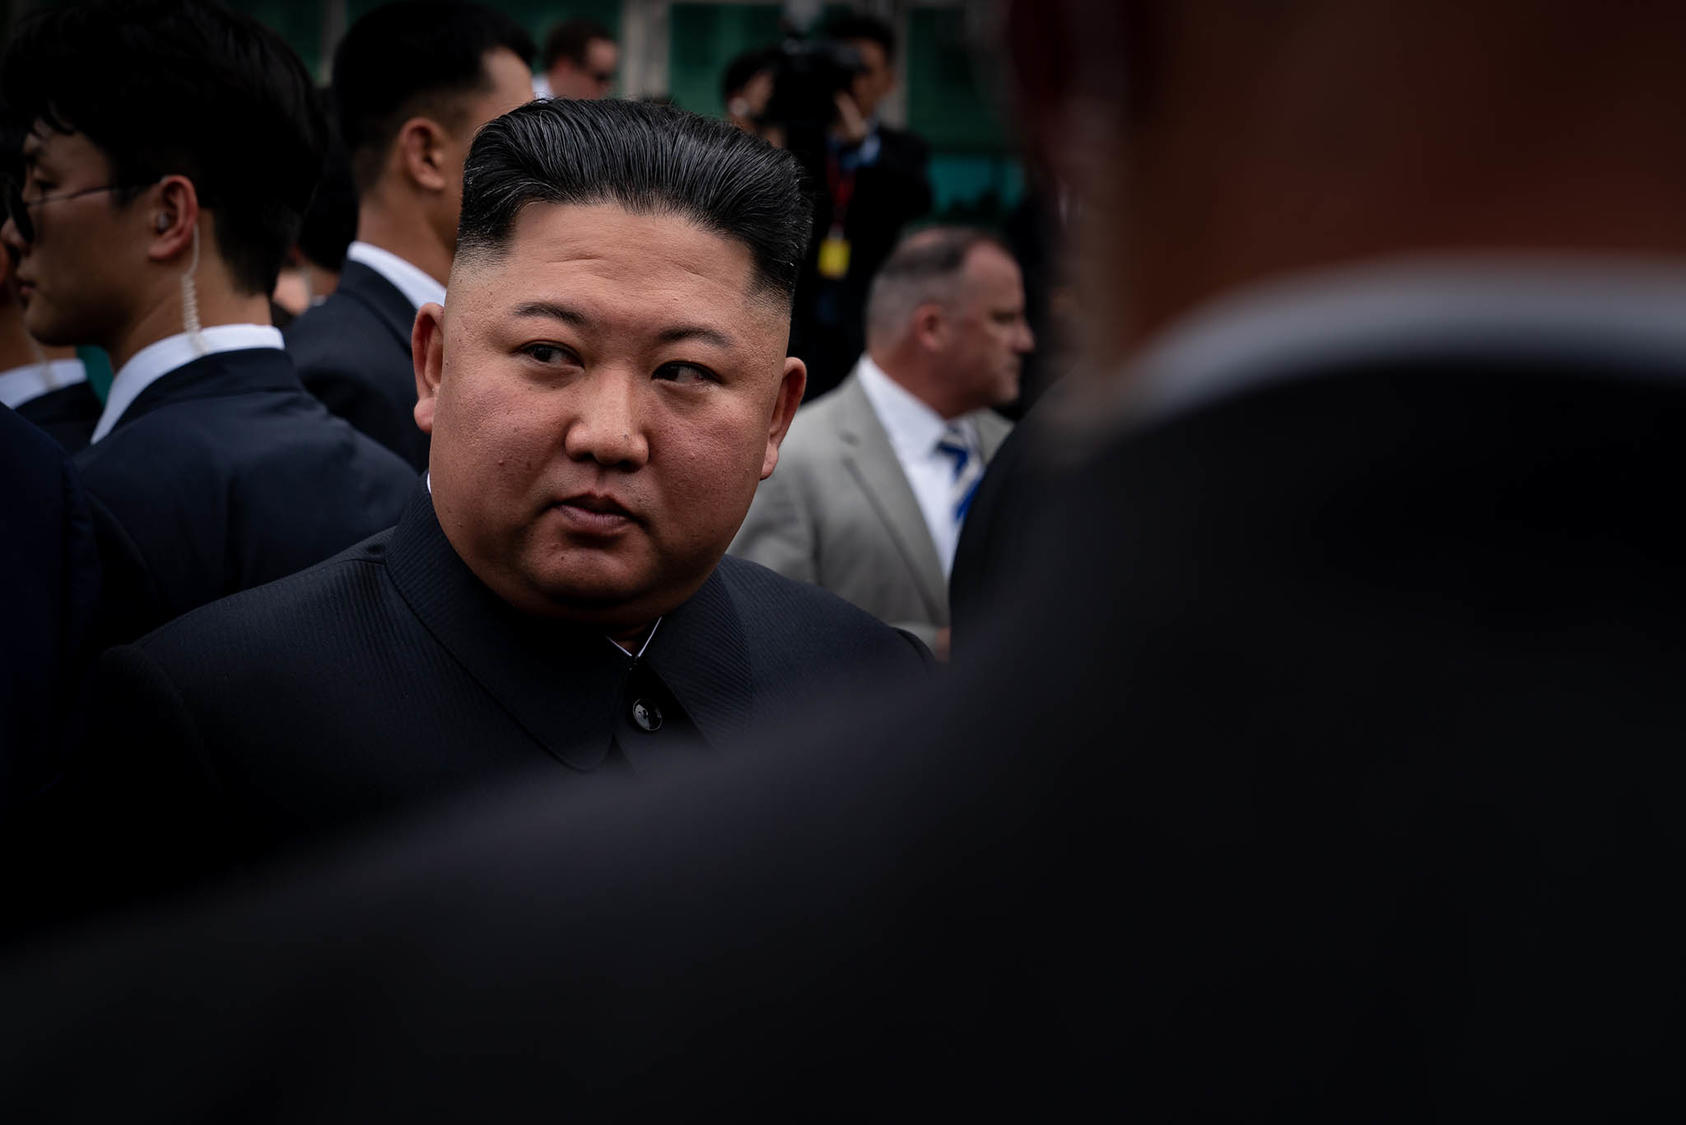 North Korean leader Kim Jong Un in the truce village of Panmunjom in the Demilitarized Zone, June 30, 2019. (Erin Schaff/The New York Times)